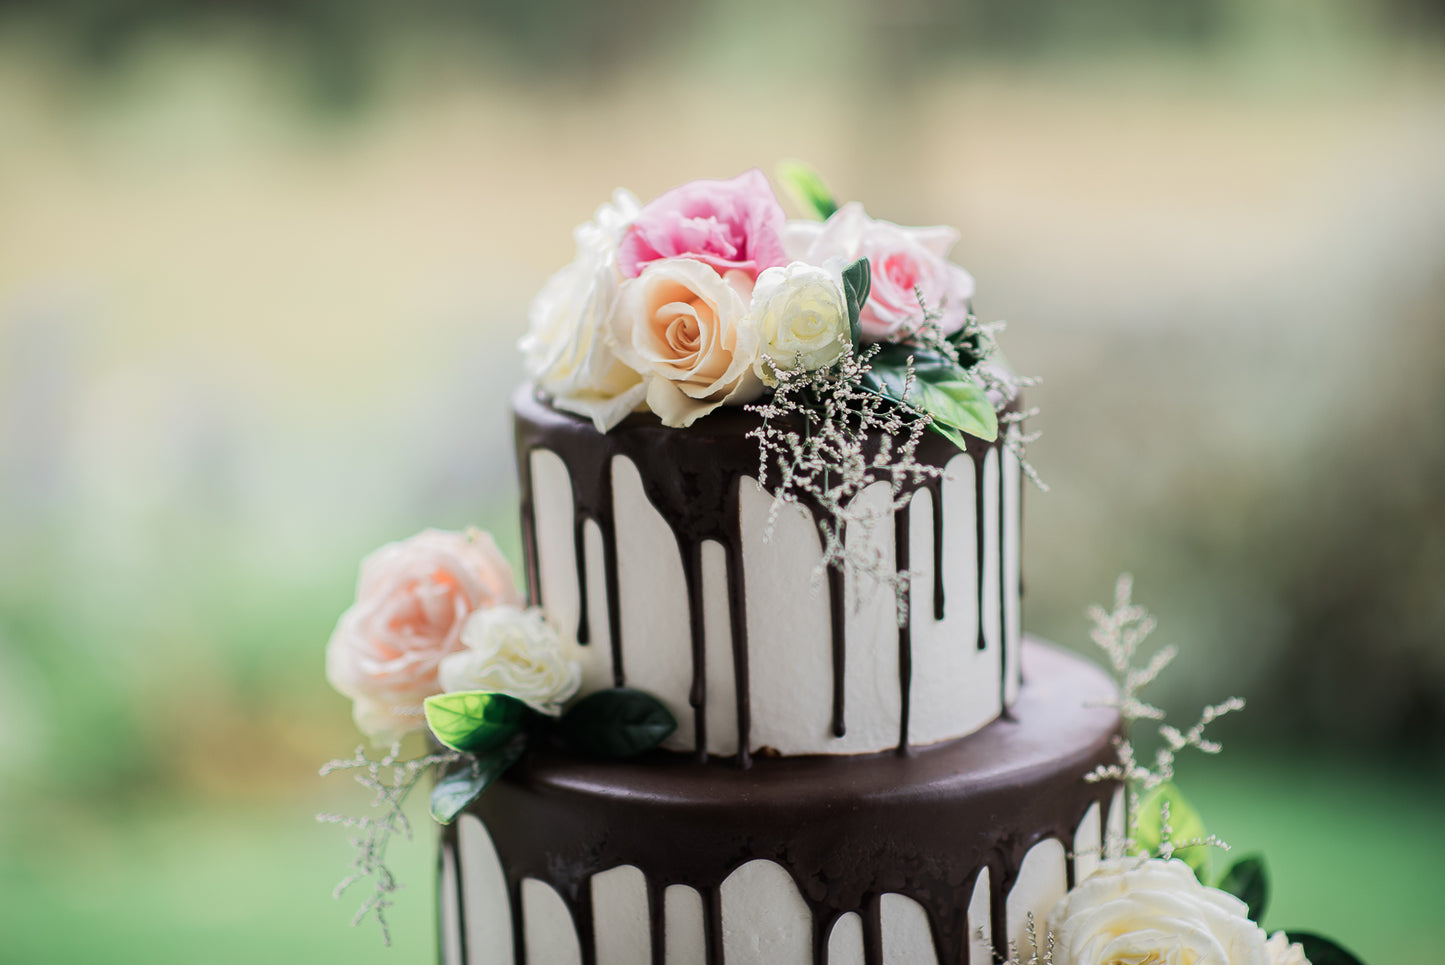 3 Tier Buttercream with Chocolate Drizzle & Pastel Flowers